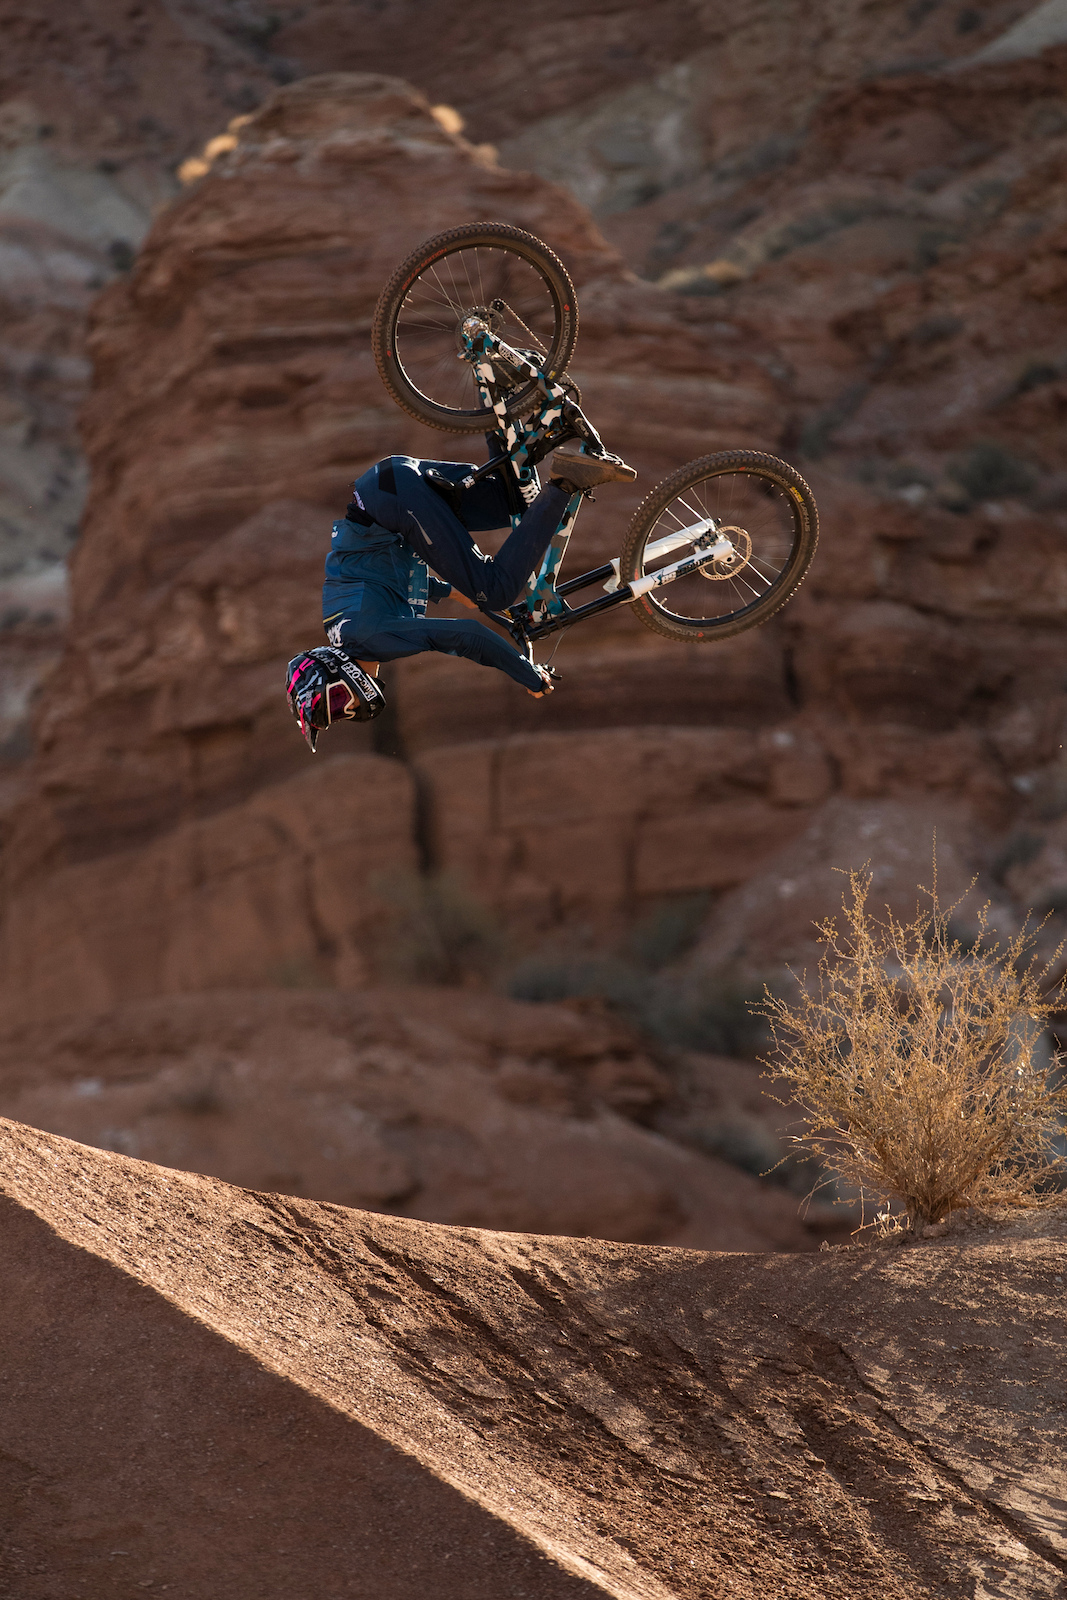 Reed Boggs in Virgin Utah during the filming of Riding Off Cliffs 